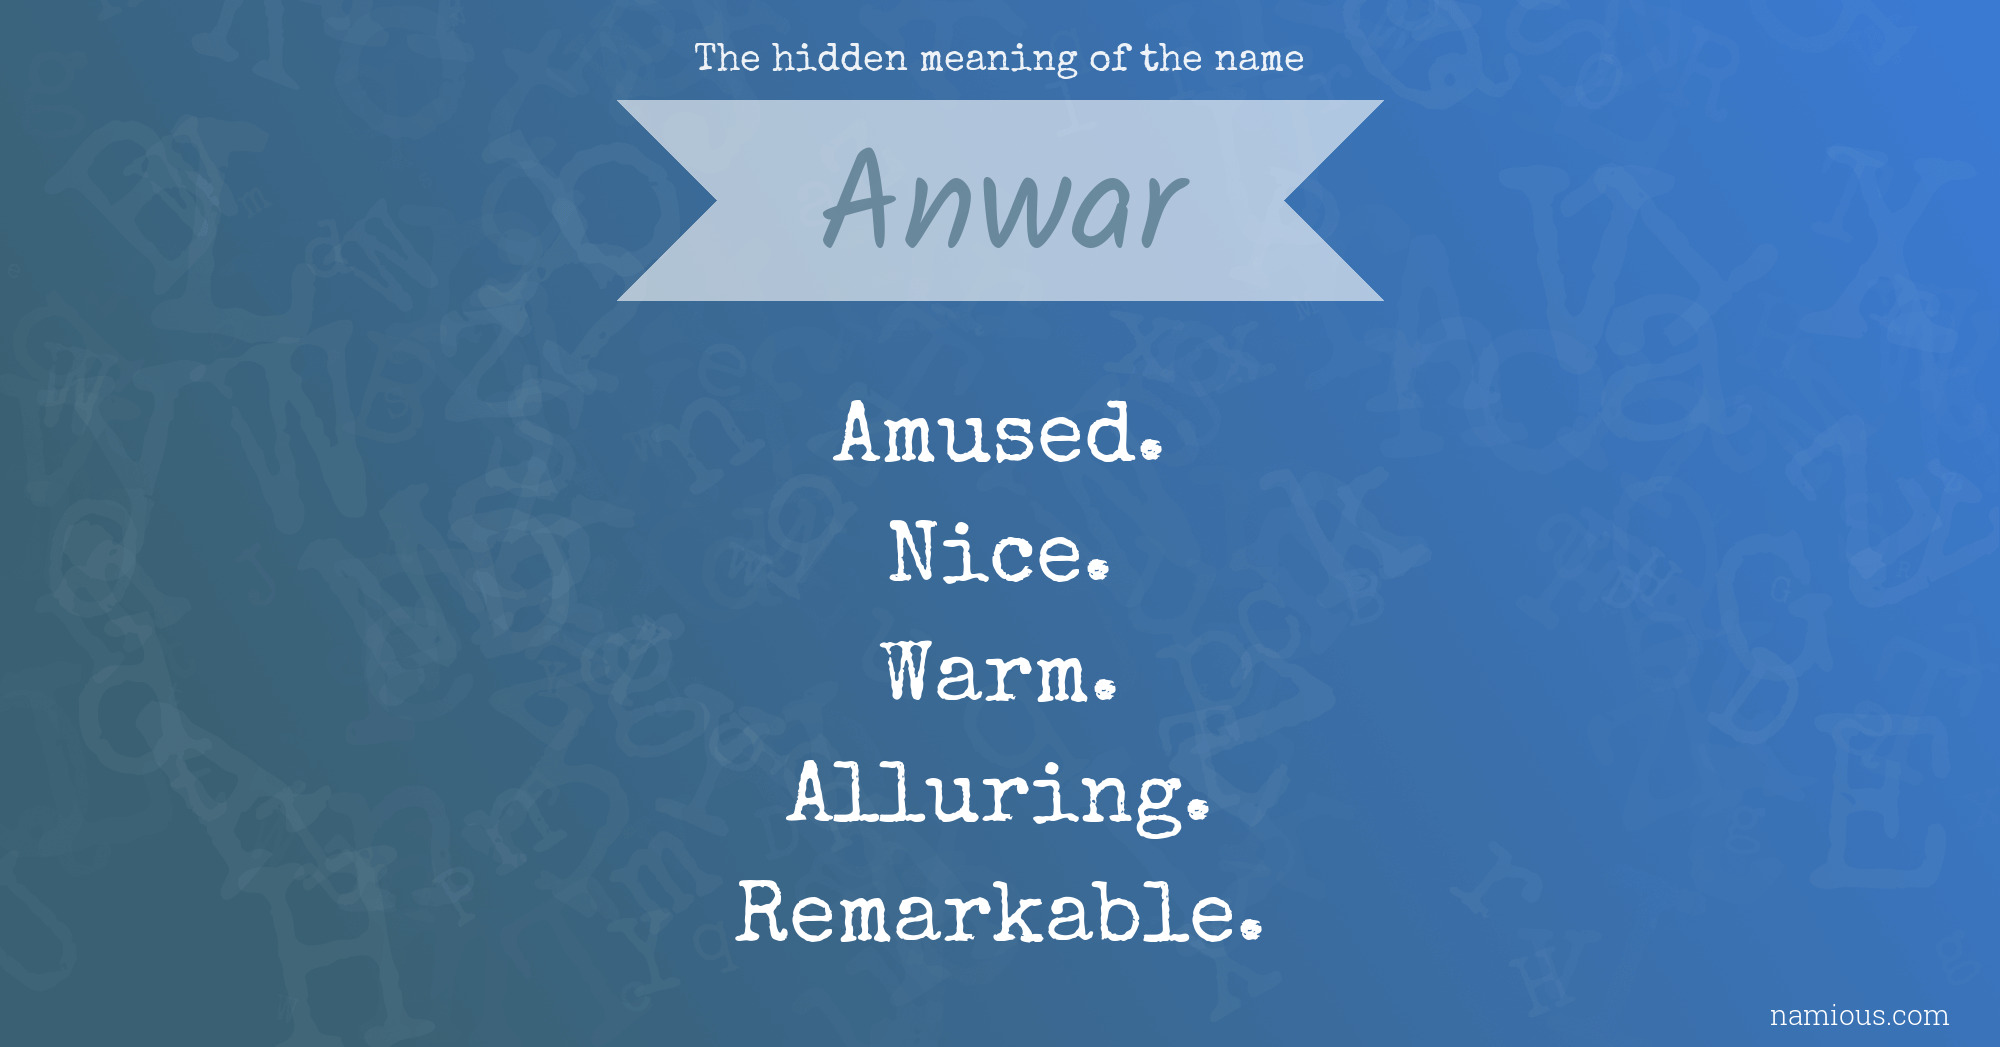 The hidden meaning of the name Anwar